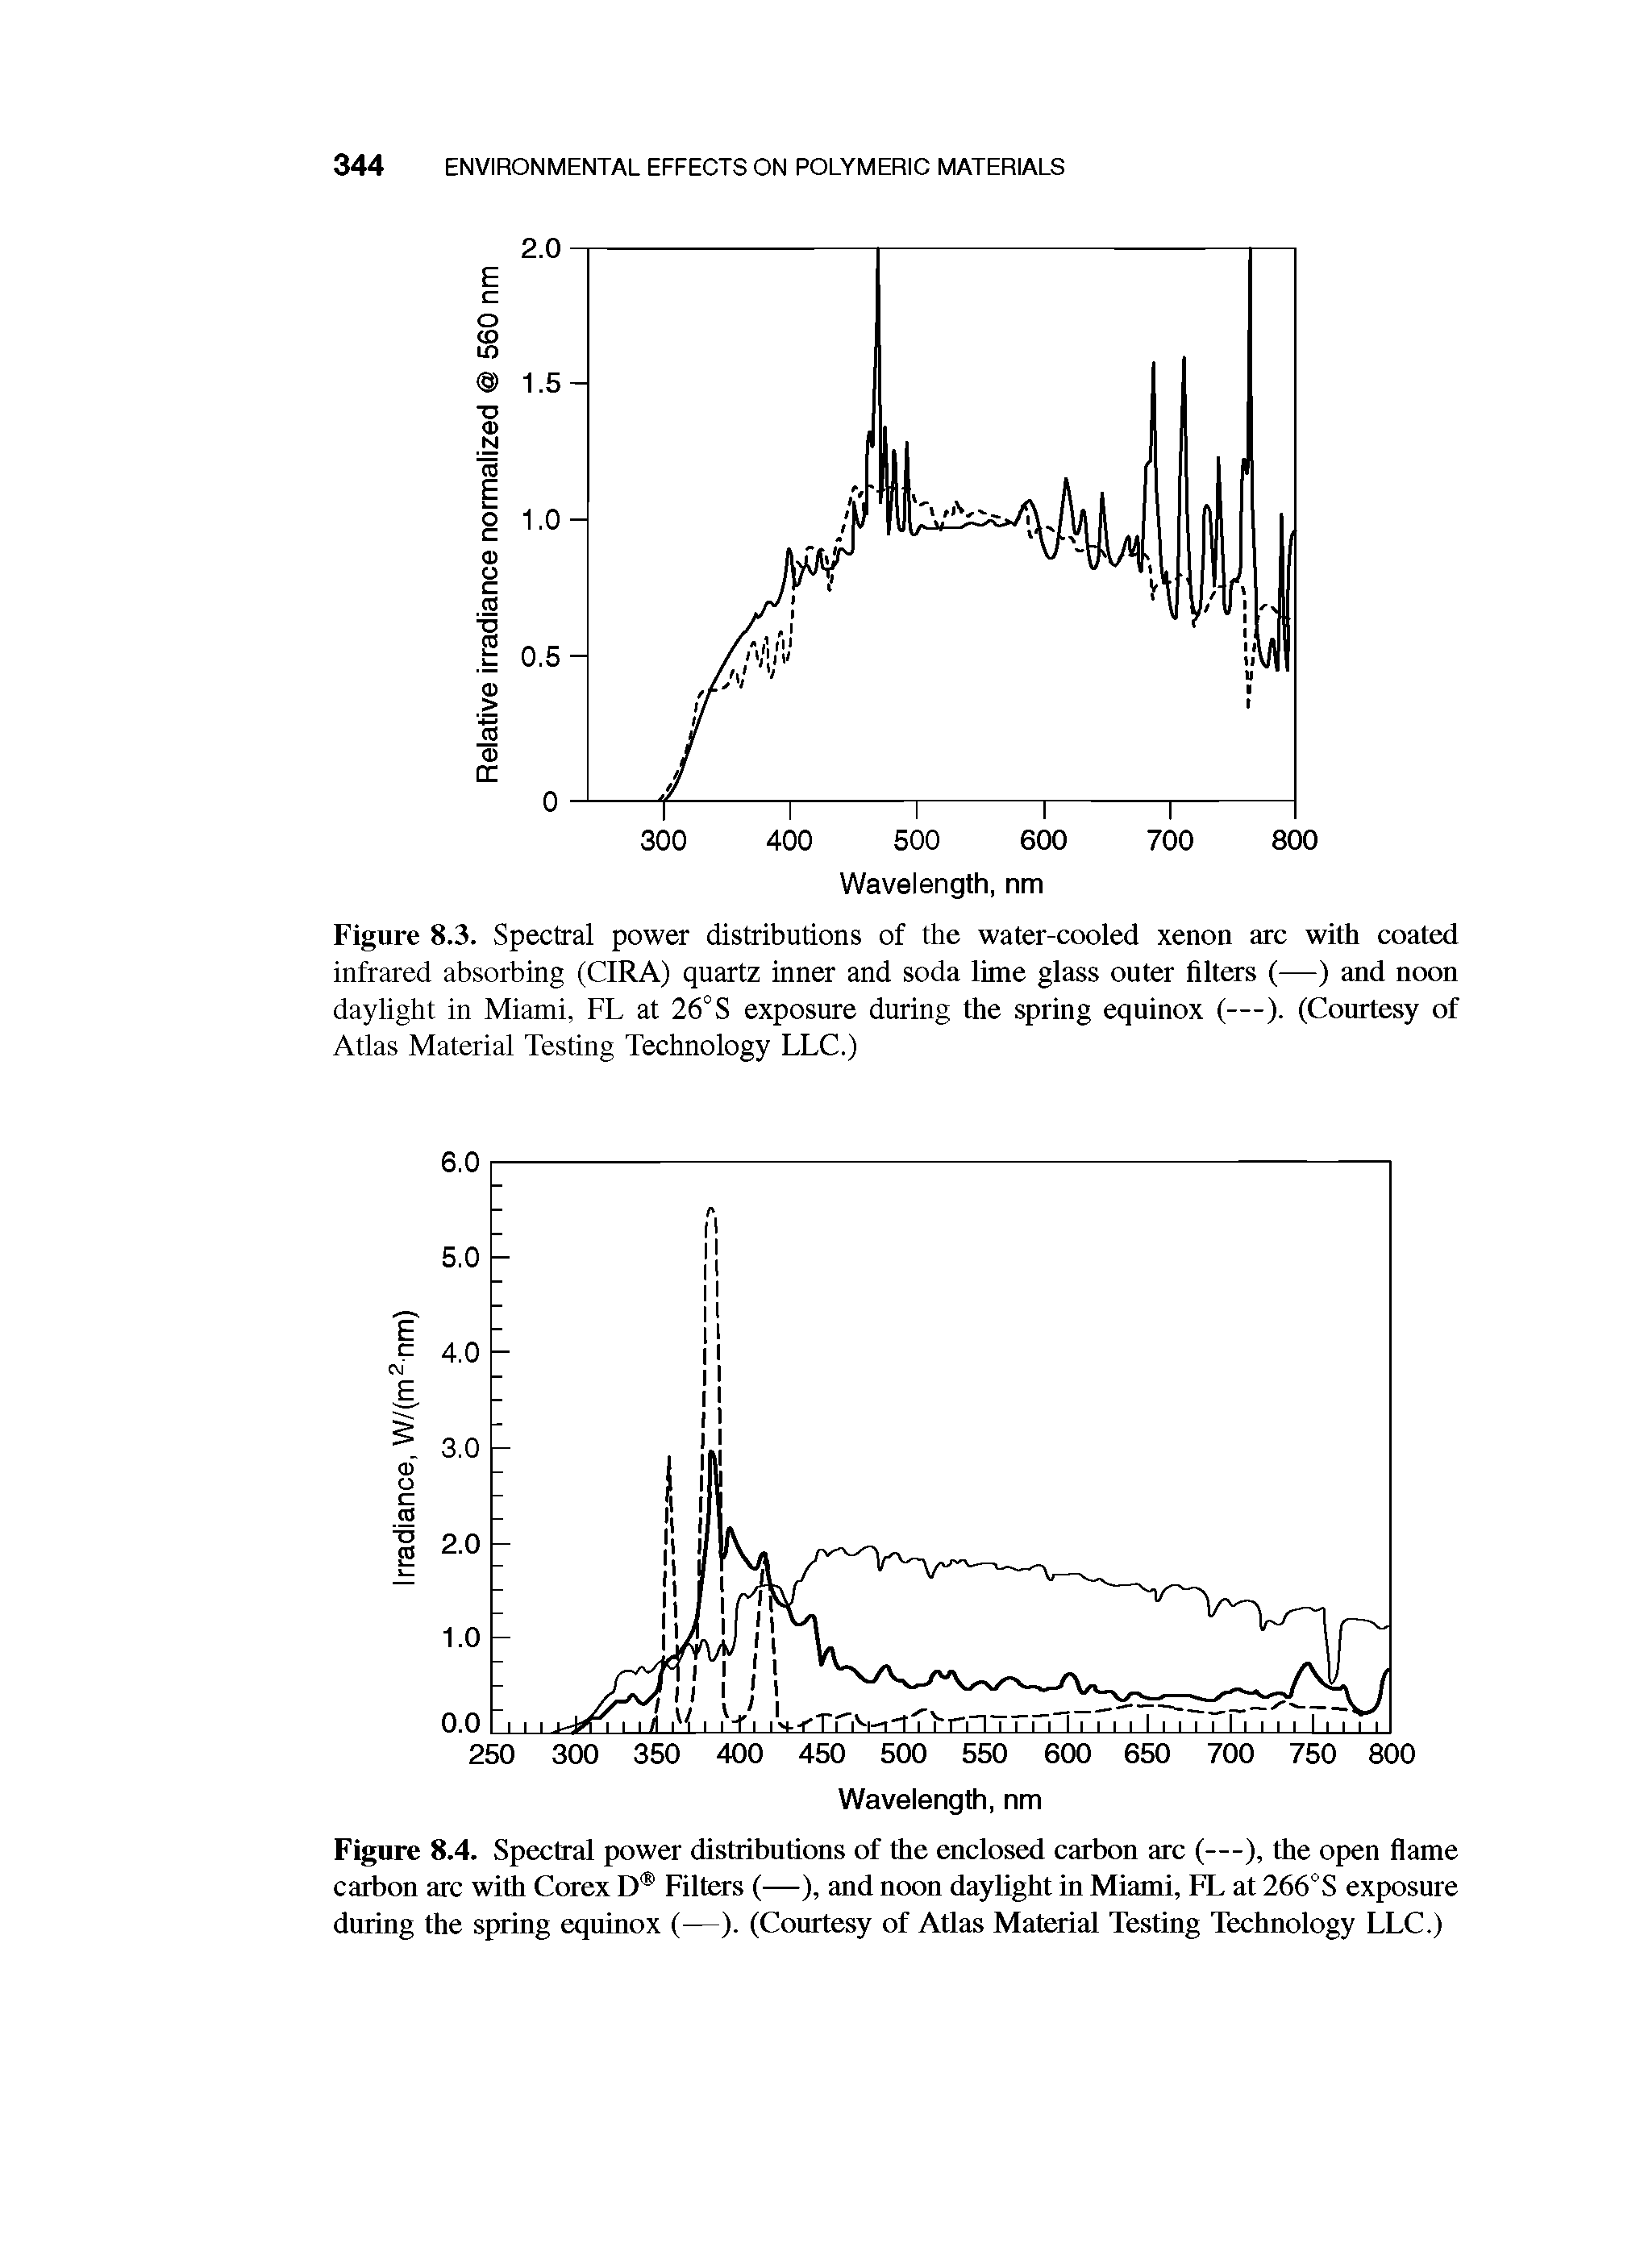 Figure 8.3. Spectral power distributions of the water-cooled xenon arc with coated infrared absorbing (CIRA) quartz inner and soda lime glass outer filters (—) and noon daylight in Miami, FL at 26°S exposure during the spring equinox (—). (Courtesy of Atlas Material Testing Technology LLC.)...